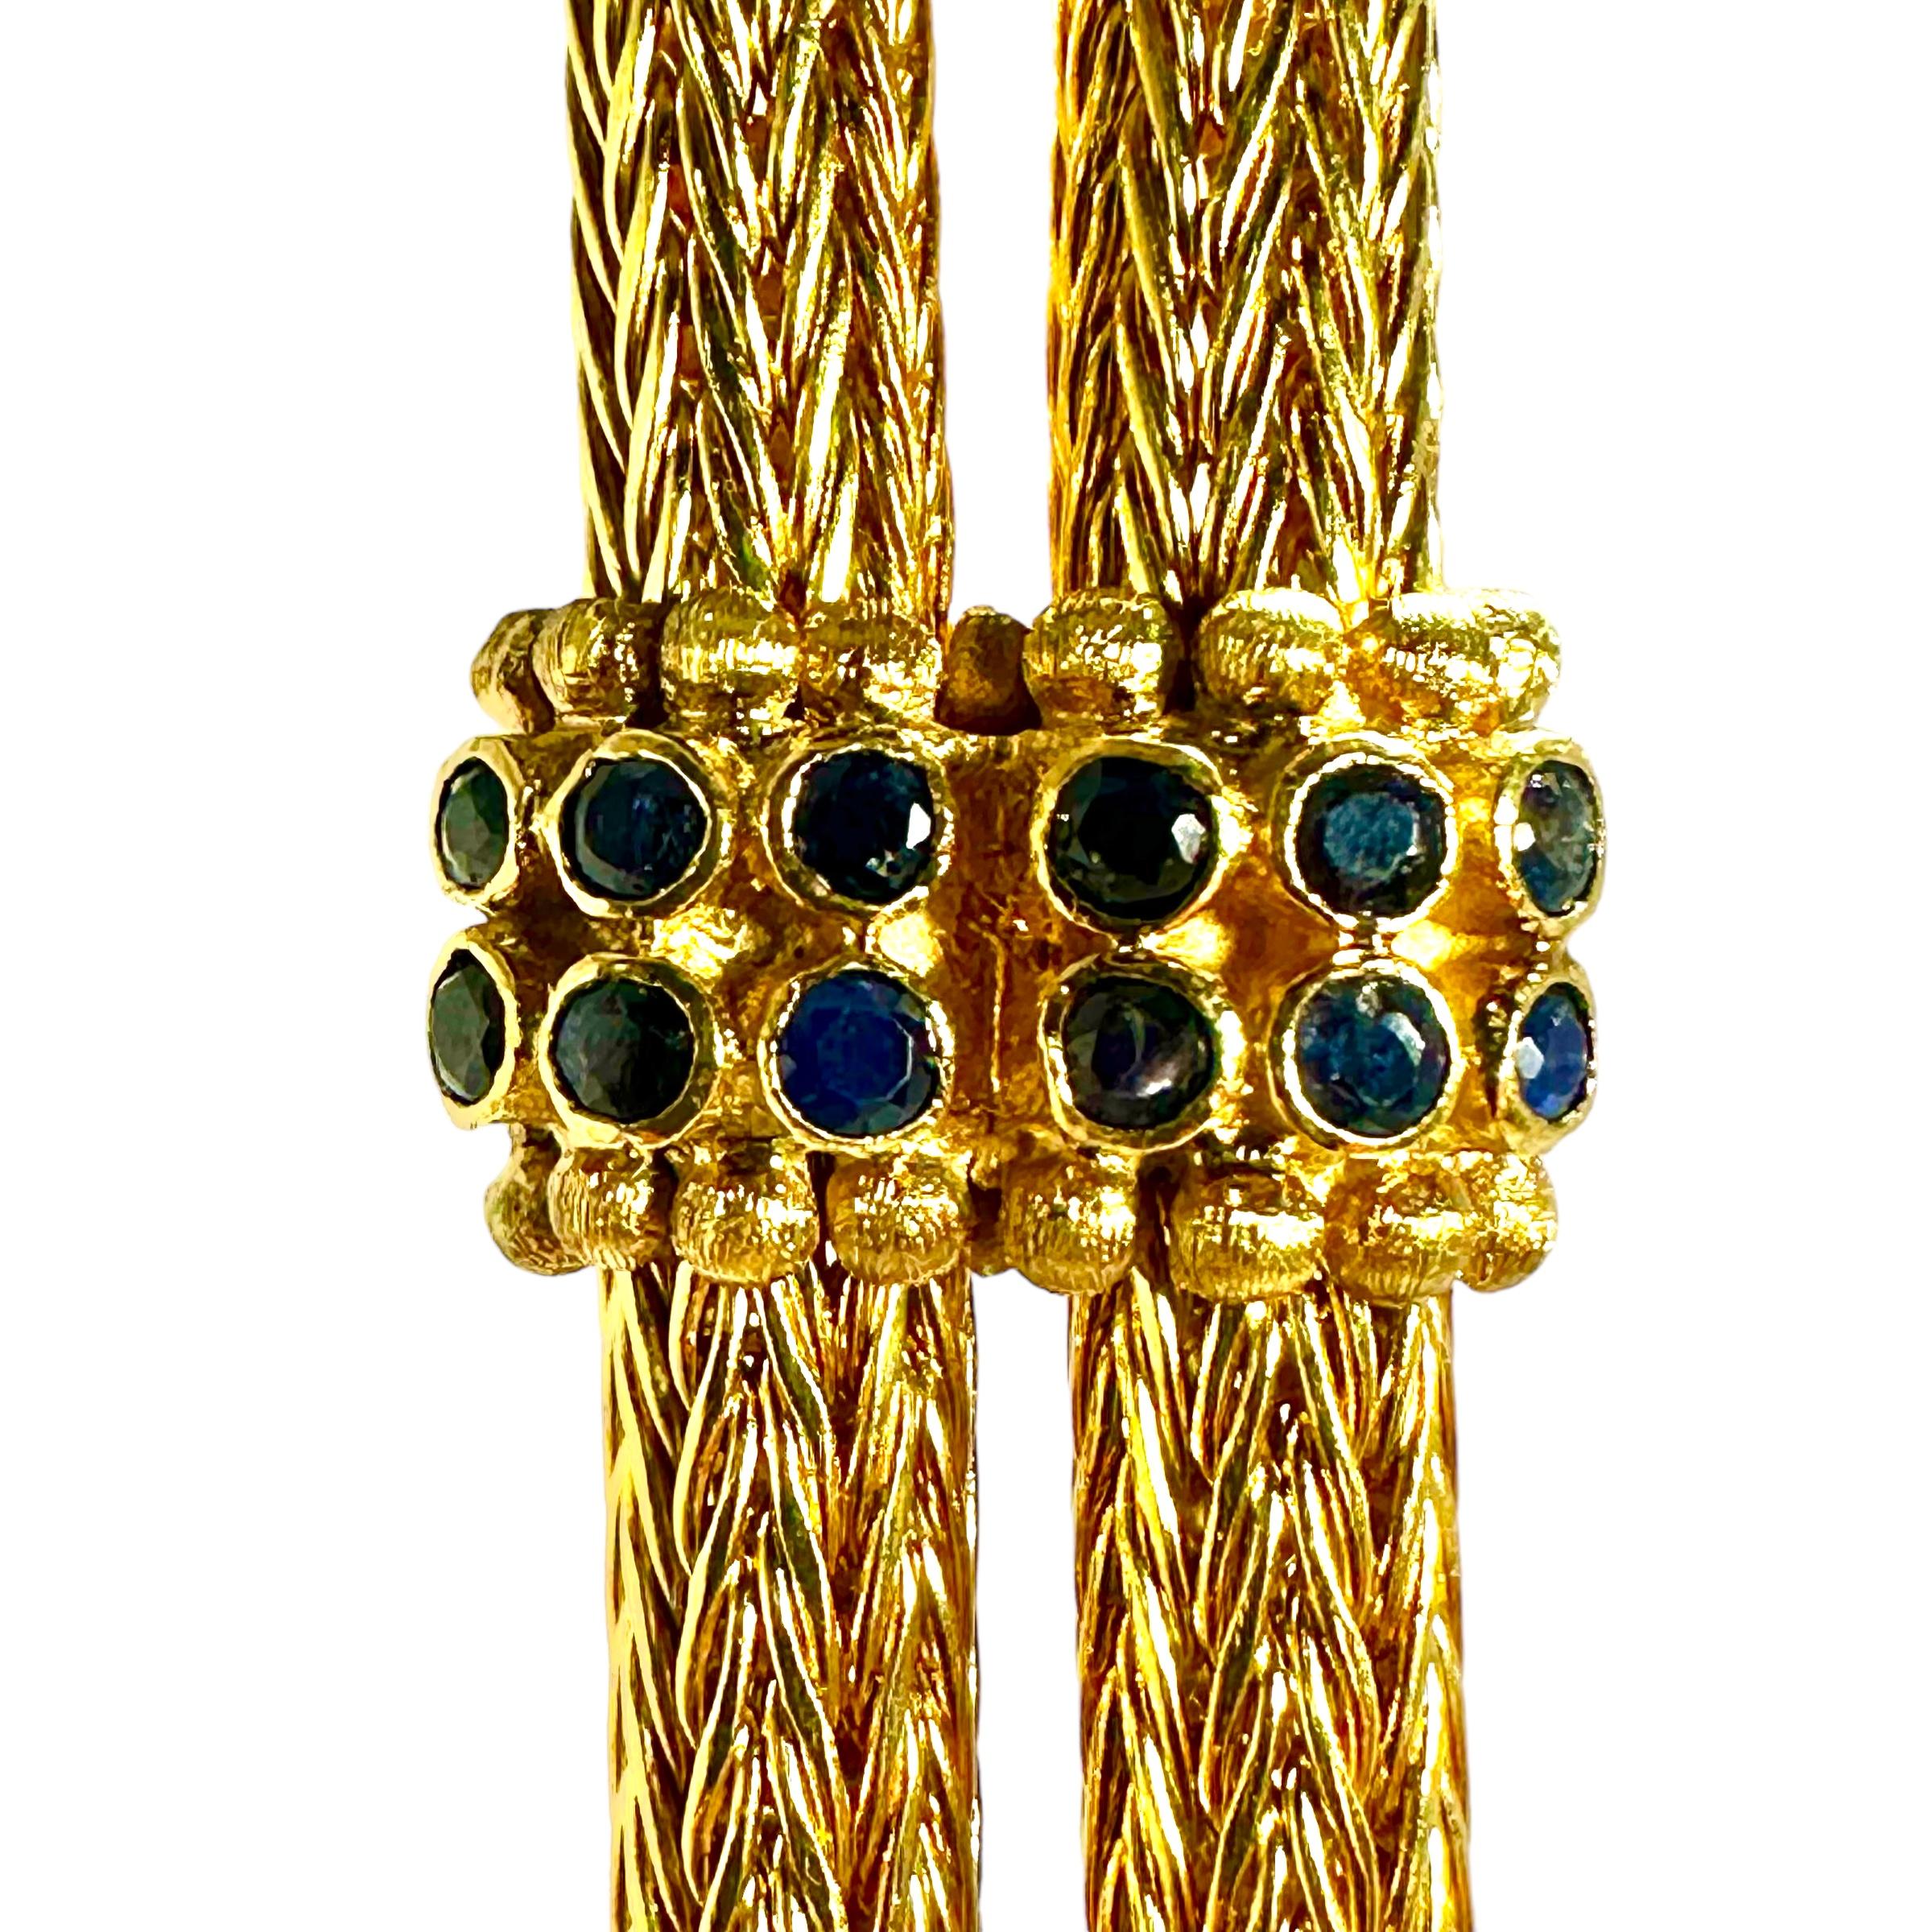 Monumental Scale Lalaounis 18k Gold Double Rams Head Necklace 38 Inches Long For Sale 2